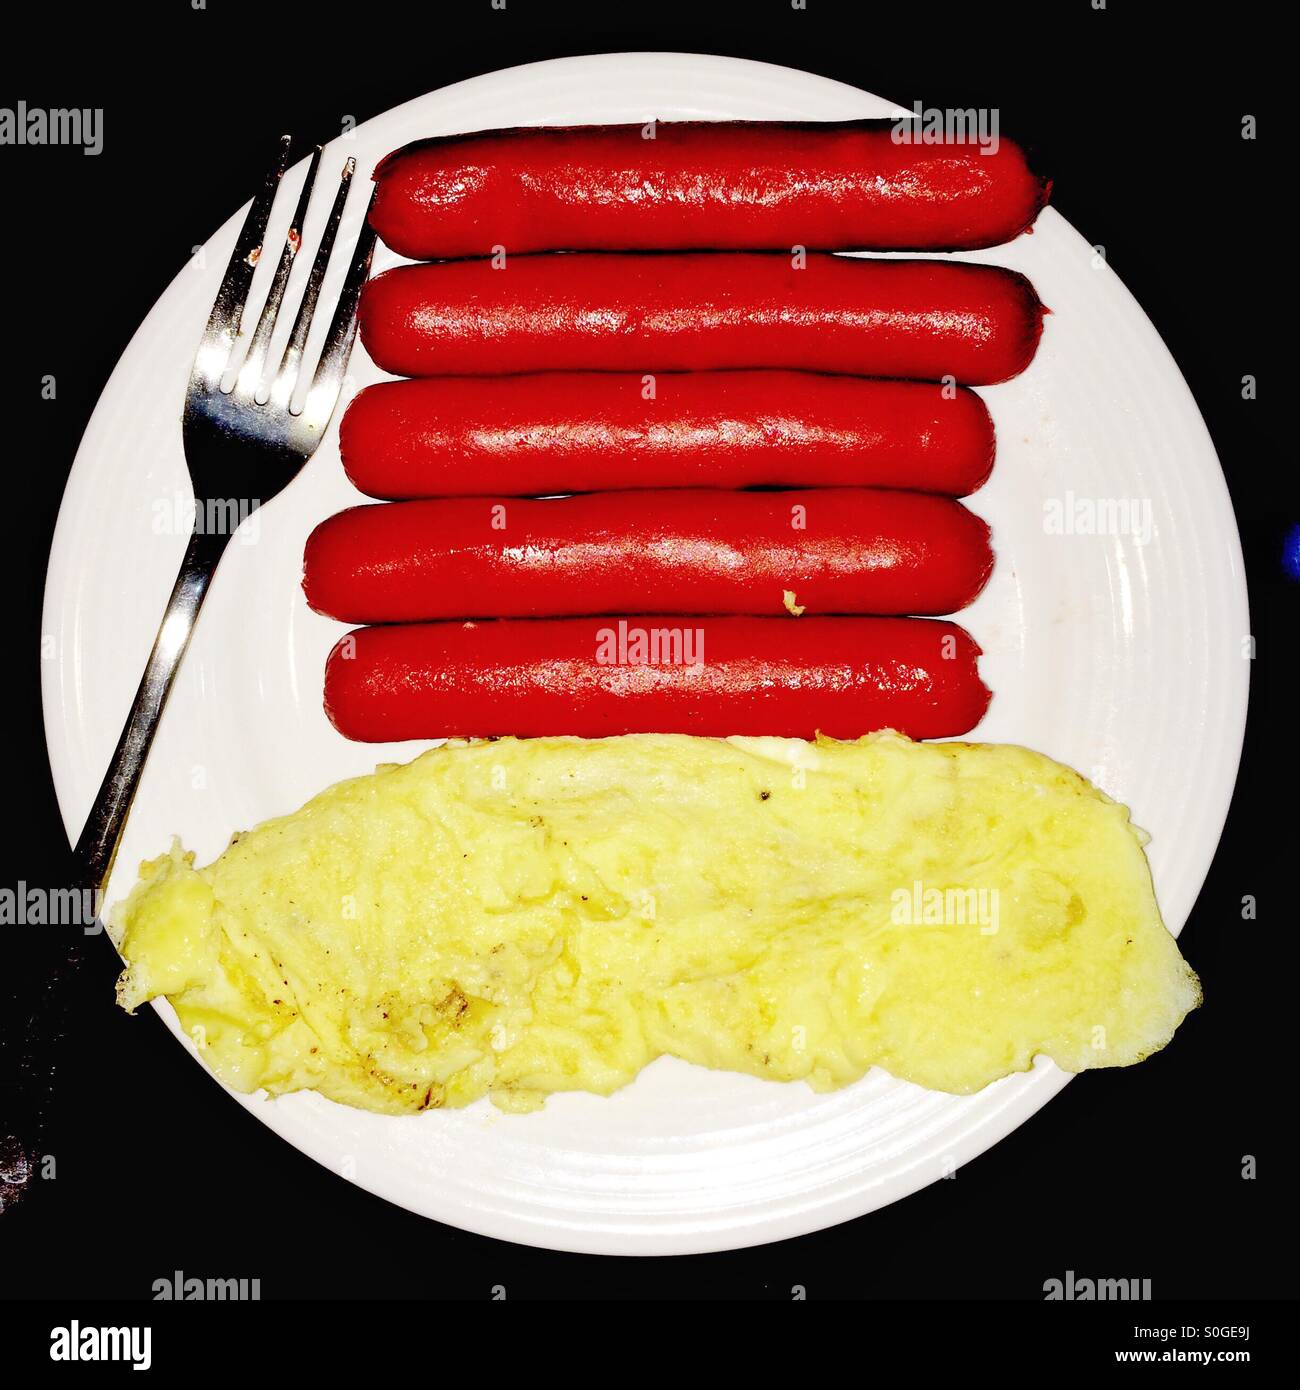 Scrambled egg and hotdogs for breakfast. Stock Photo